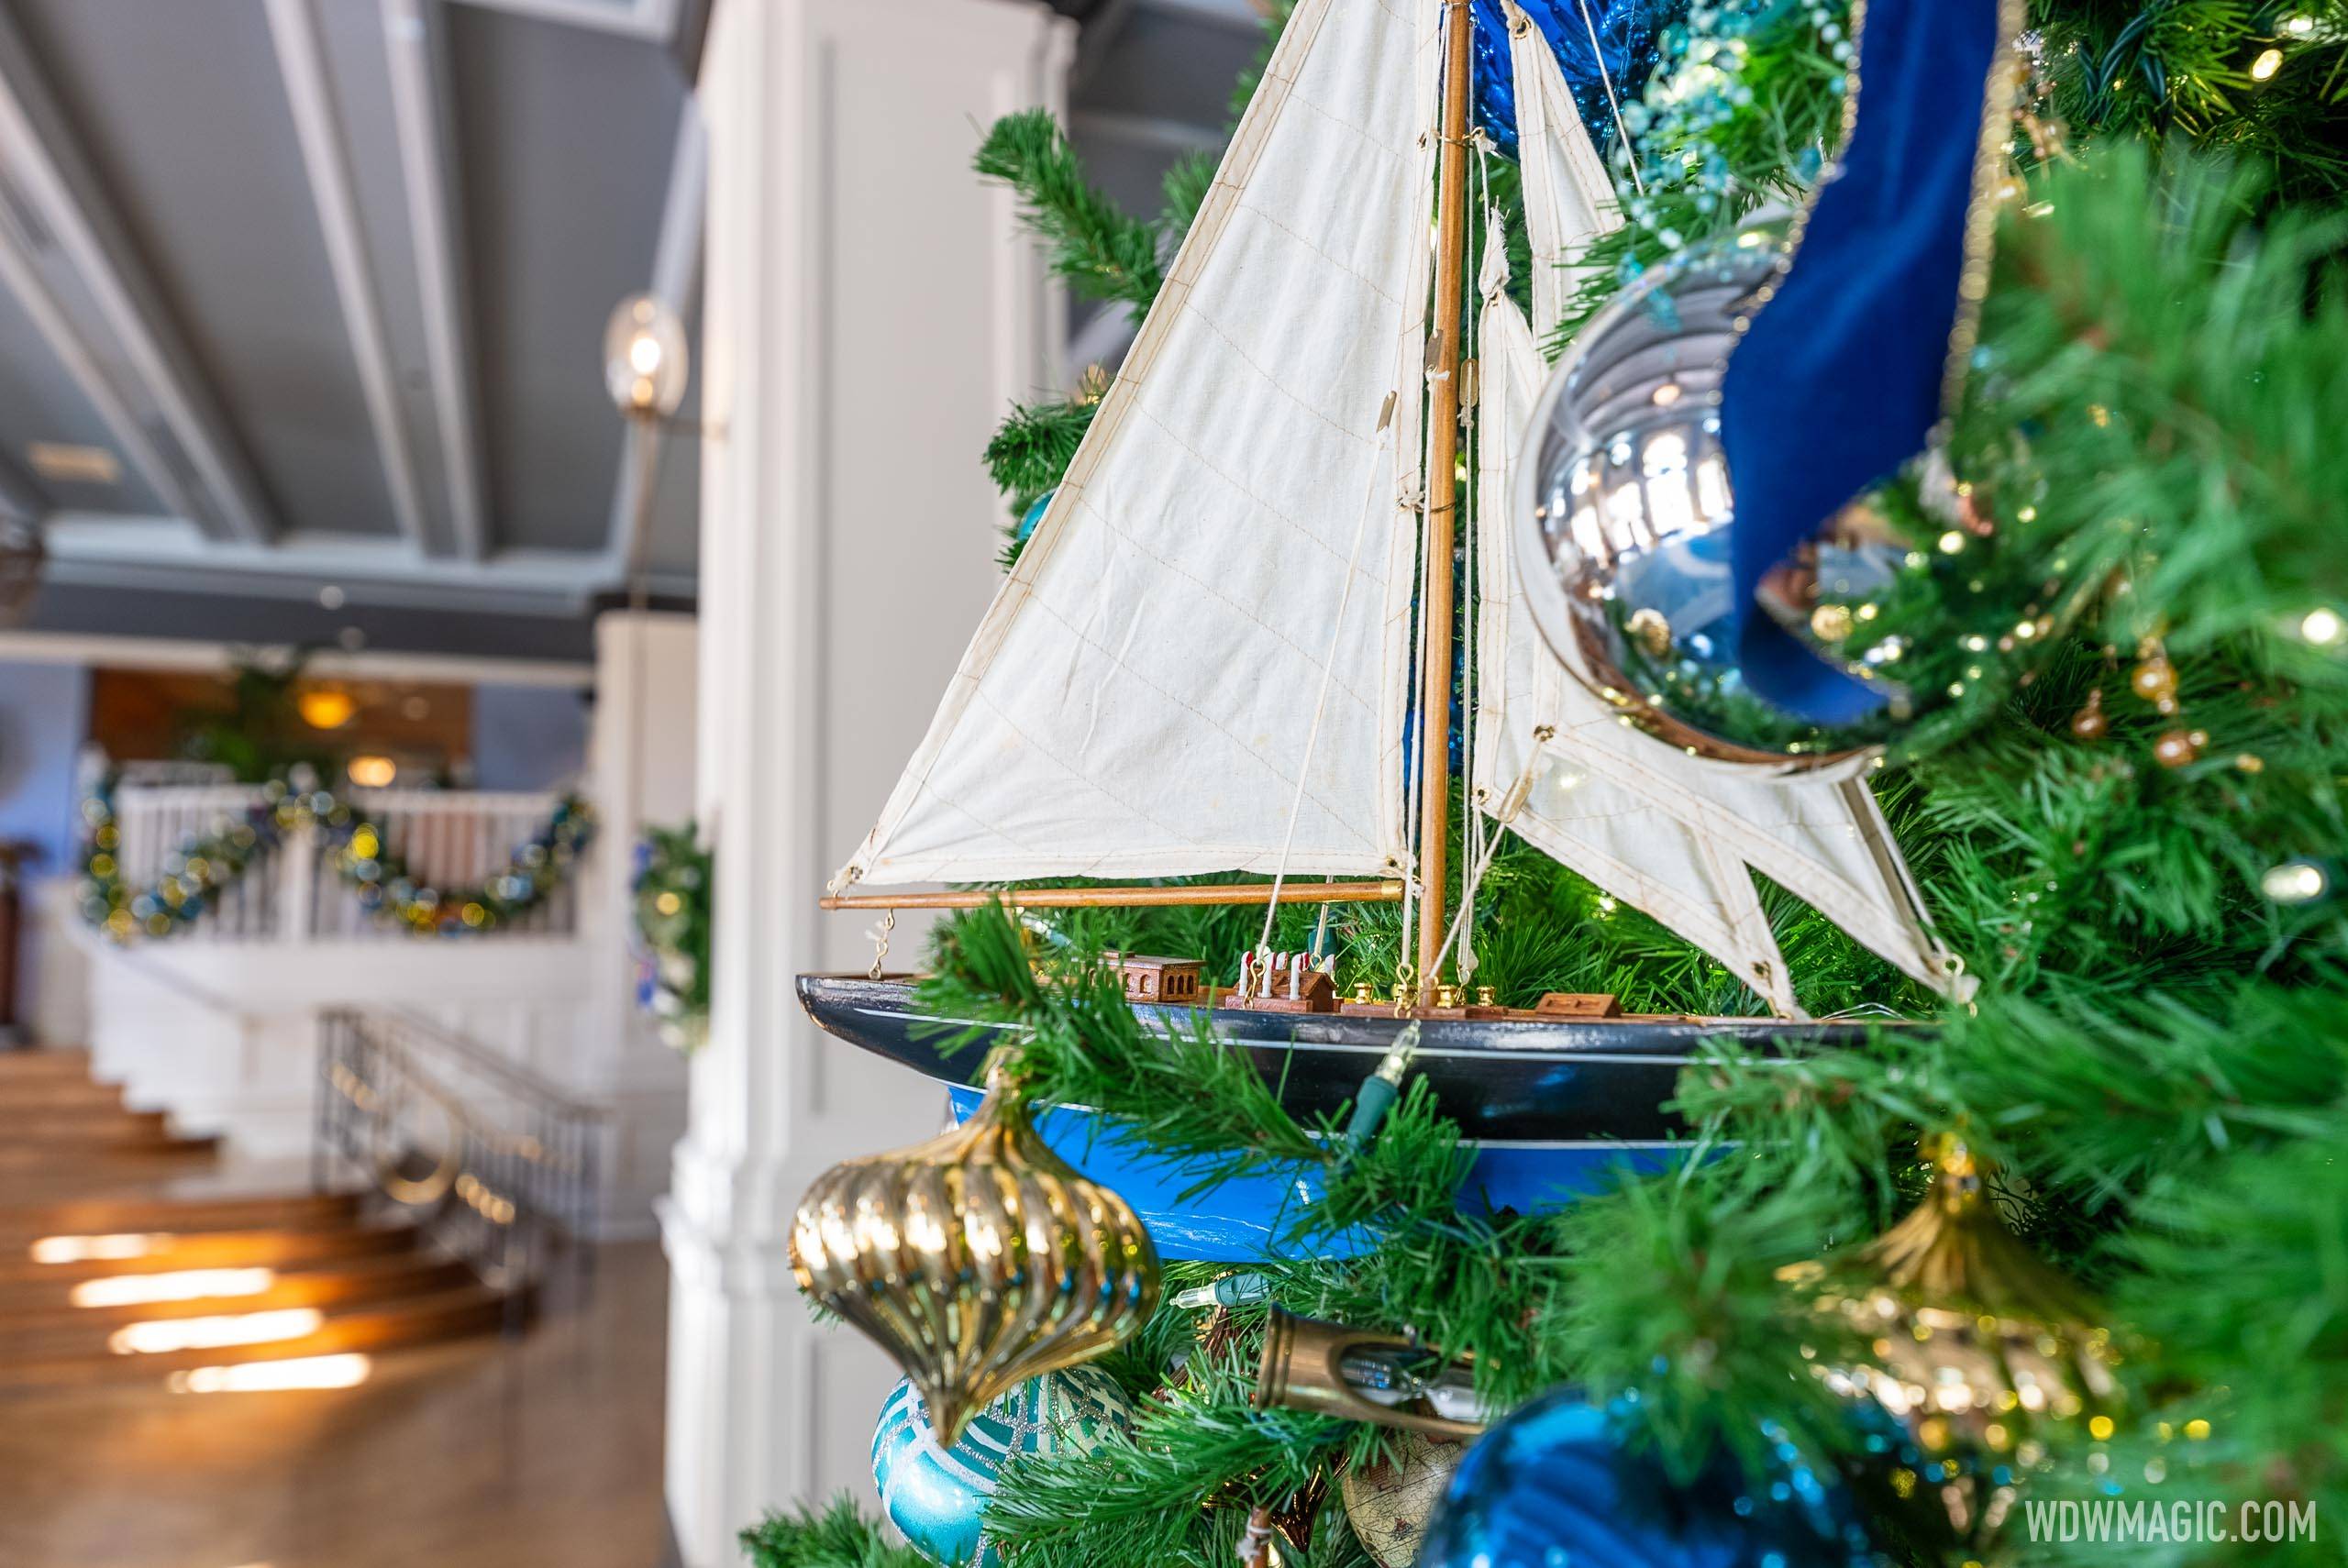 The tree is decorated with nautical inspired ornaments